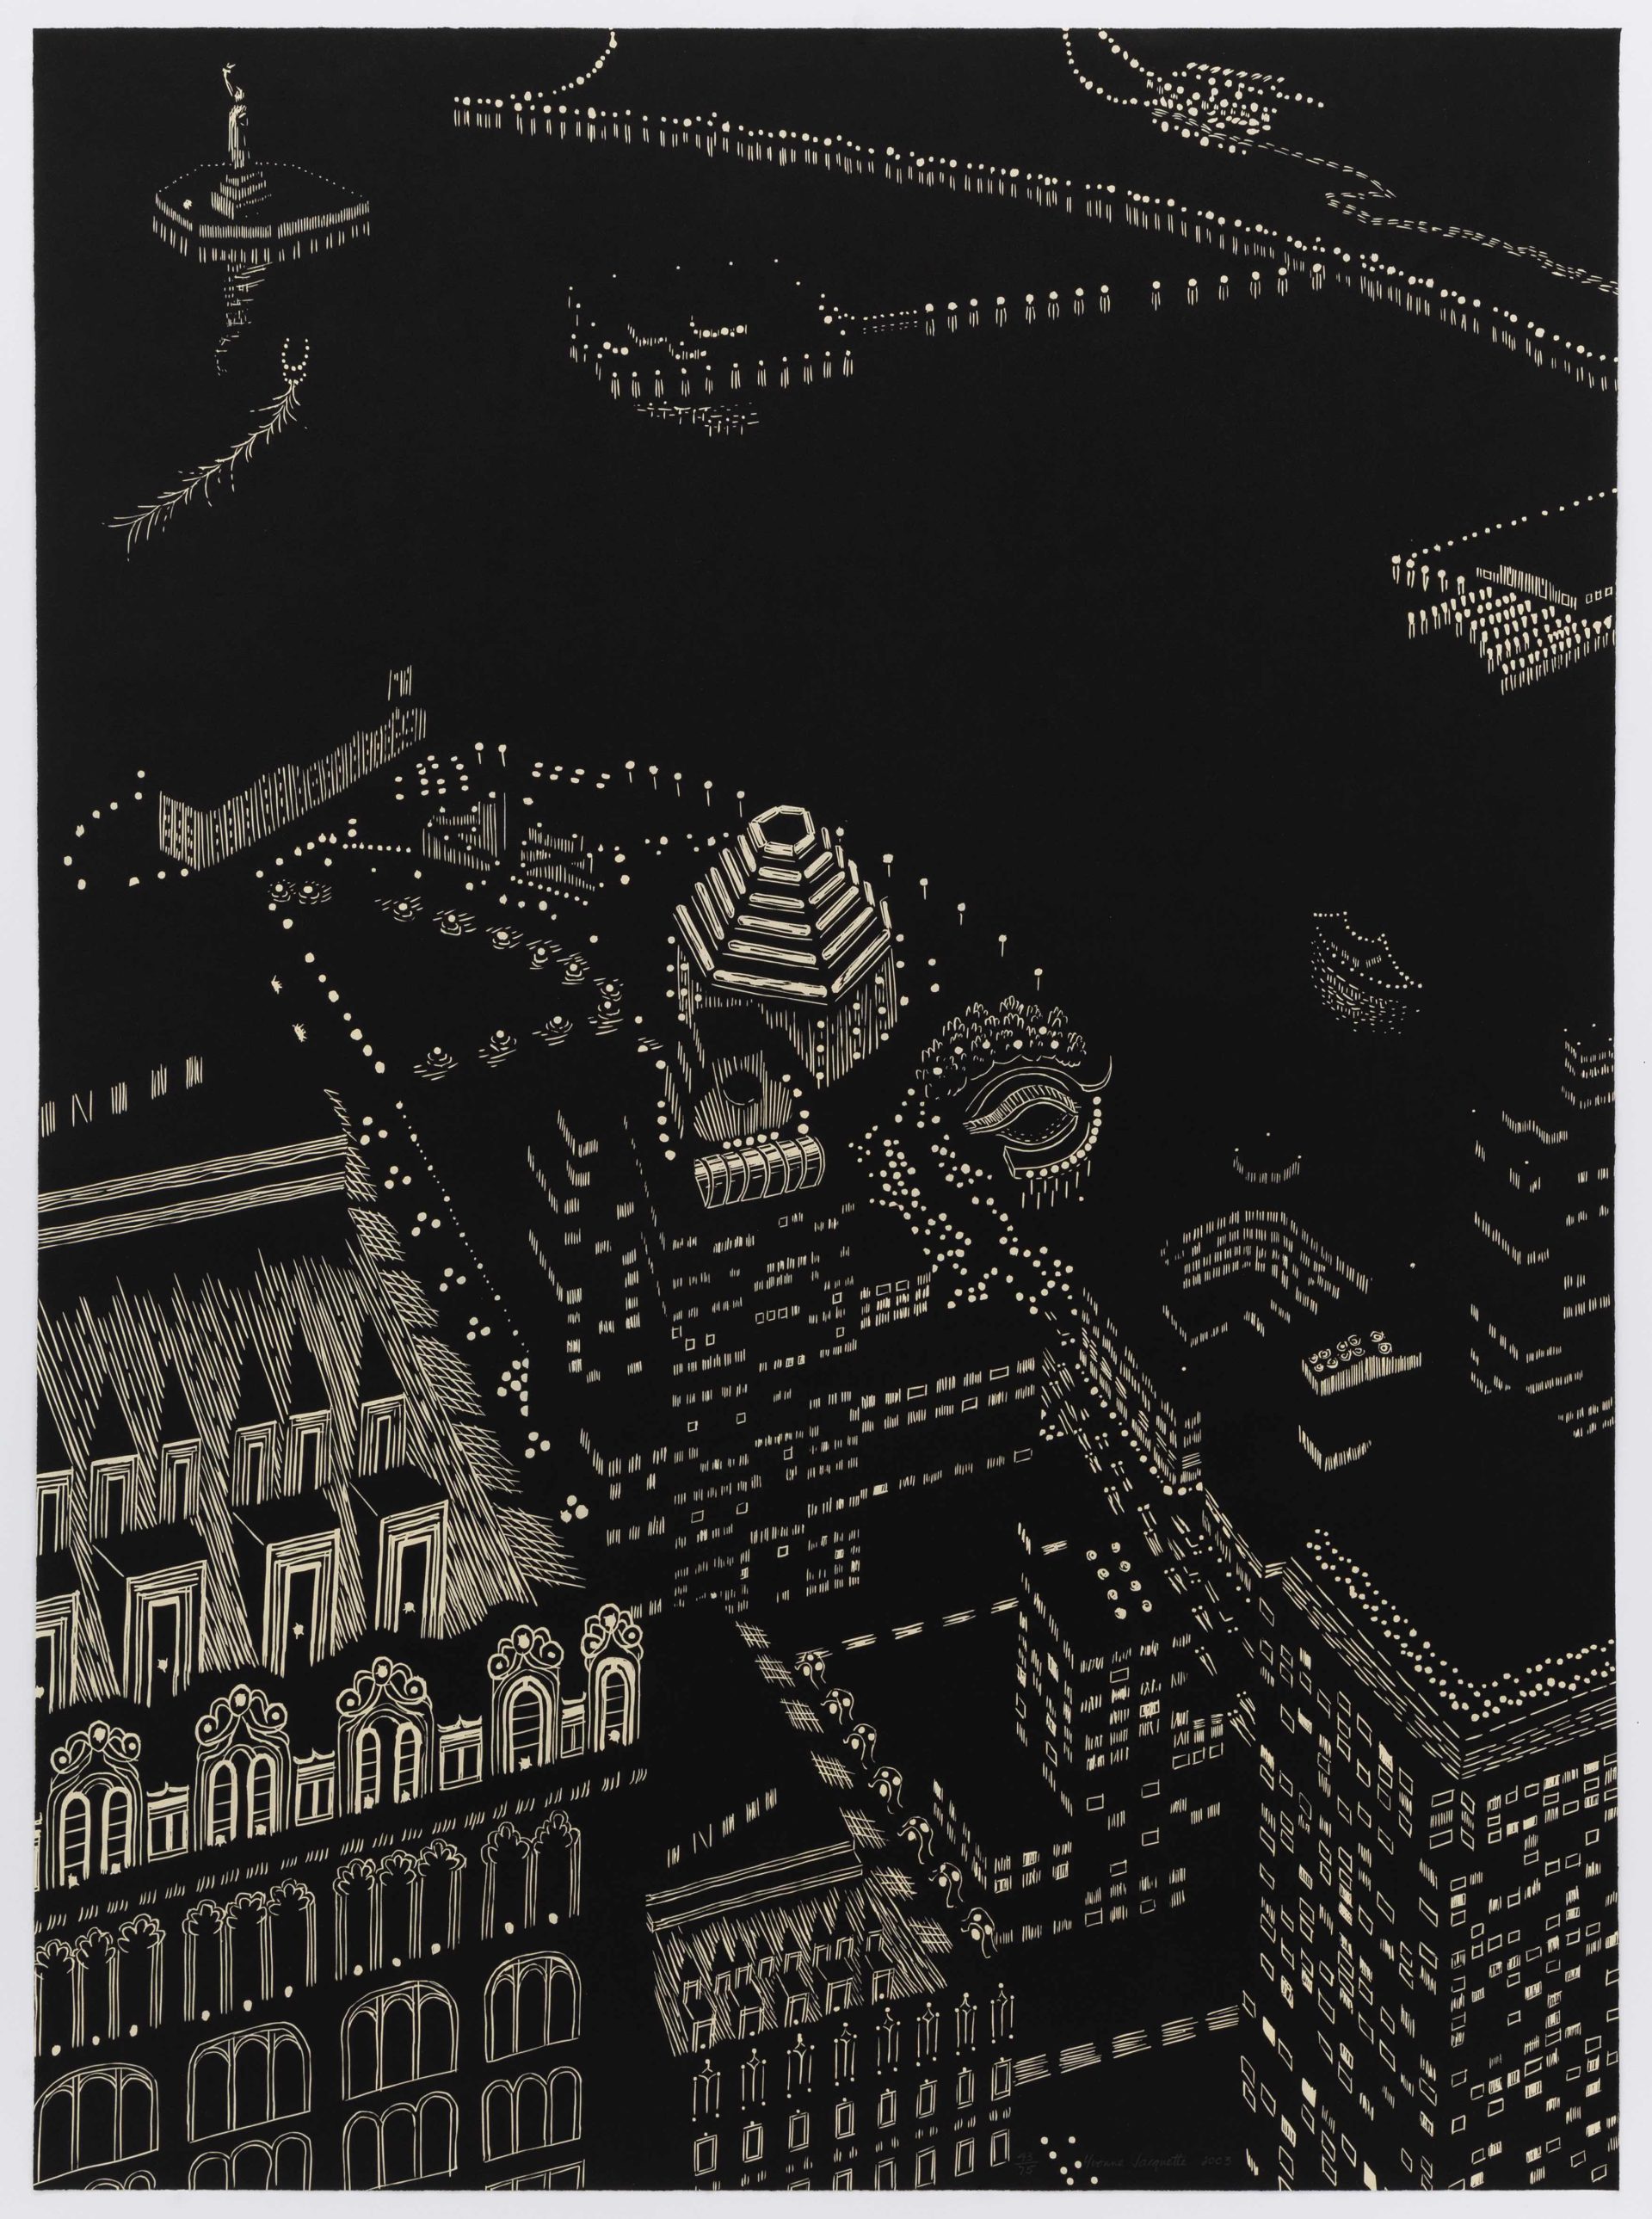 New York Harbor Composite, 2003, Woodcut, 44 1/2 x 32 inches (113 x 81.3 cm), Edition of 75